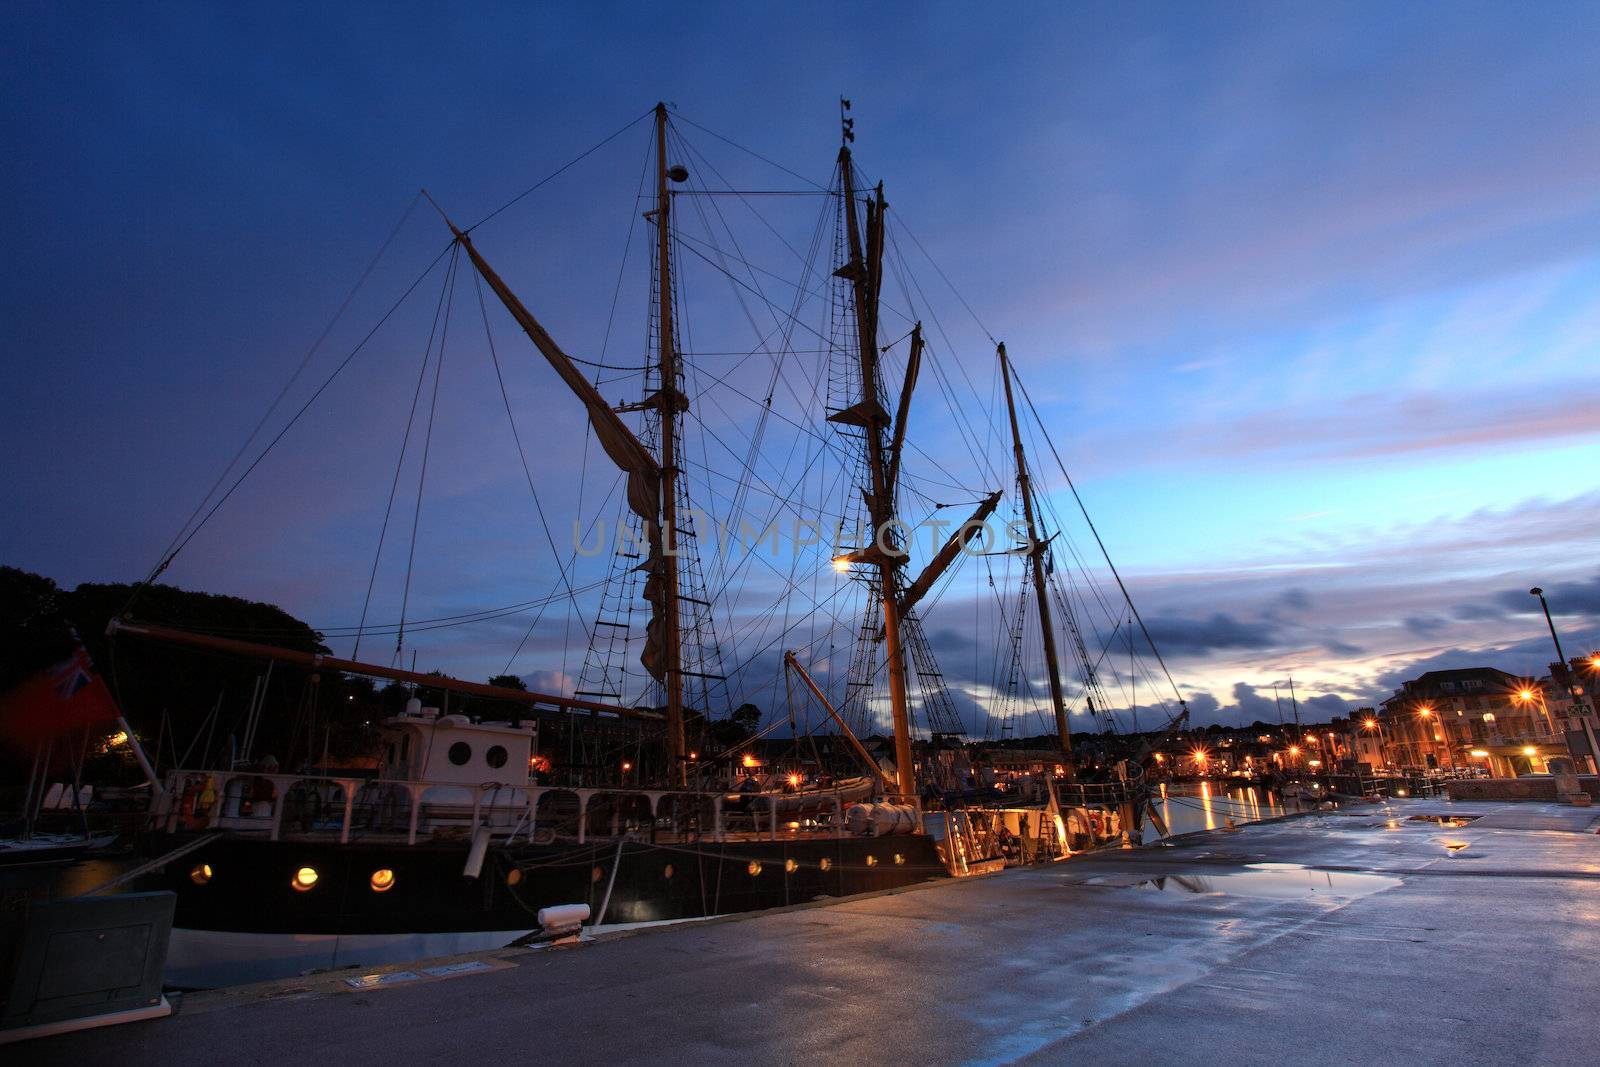 The Pelican Sailing Ship in Weymouth Quay at Sunset